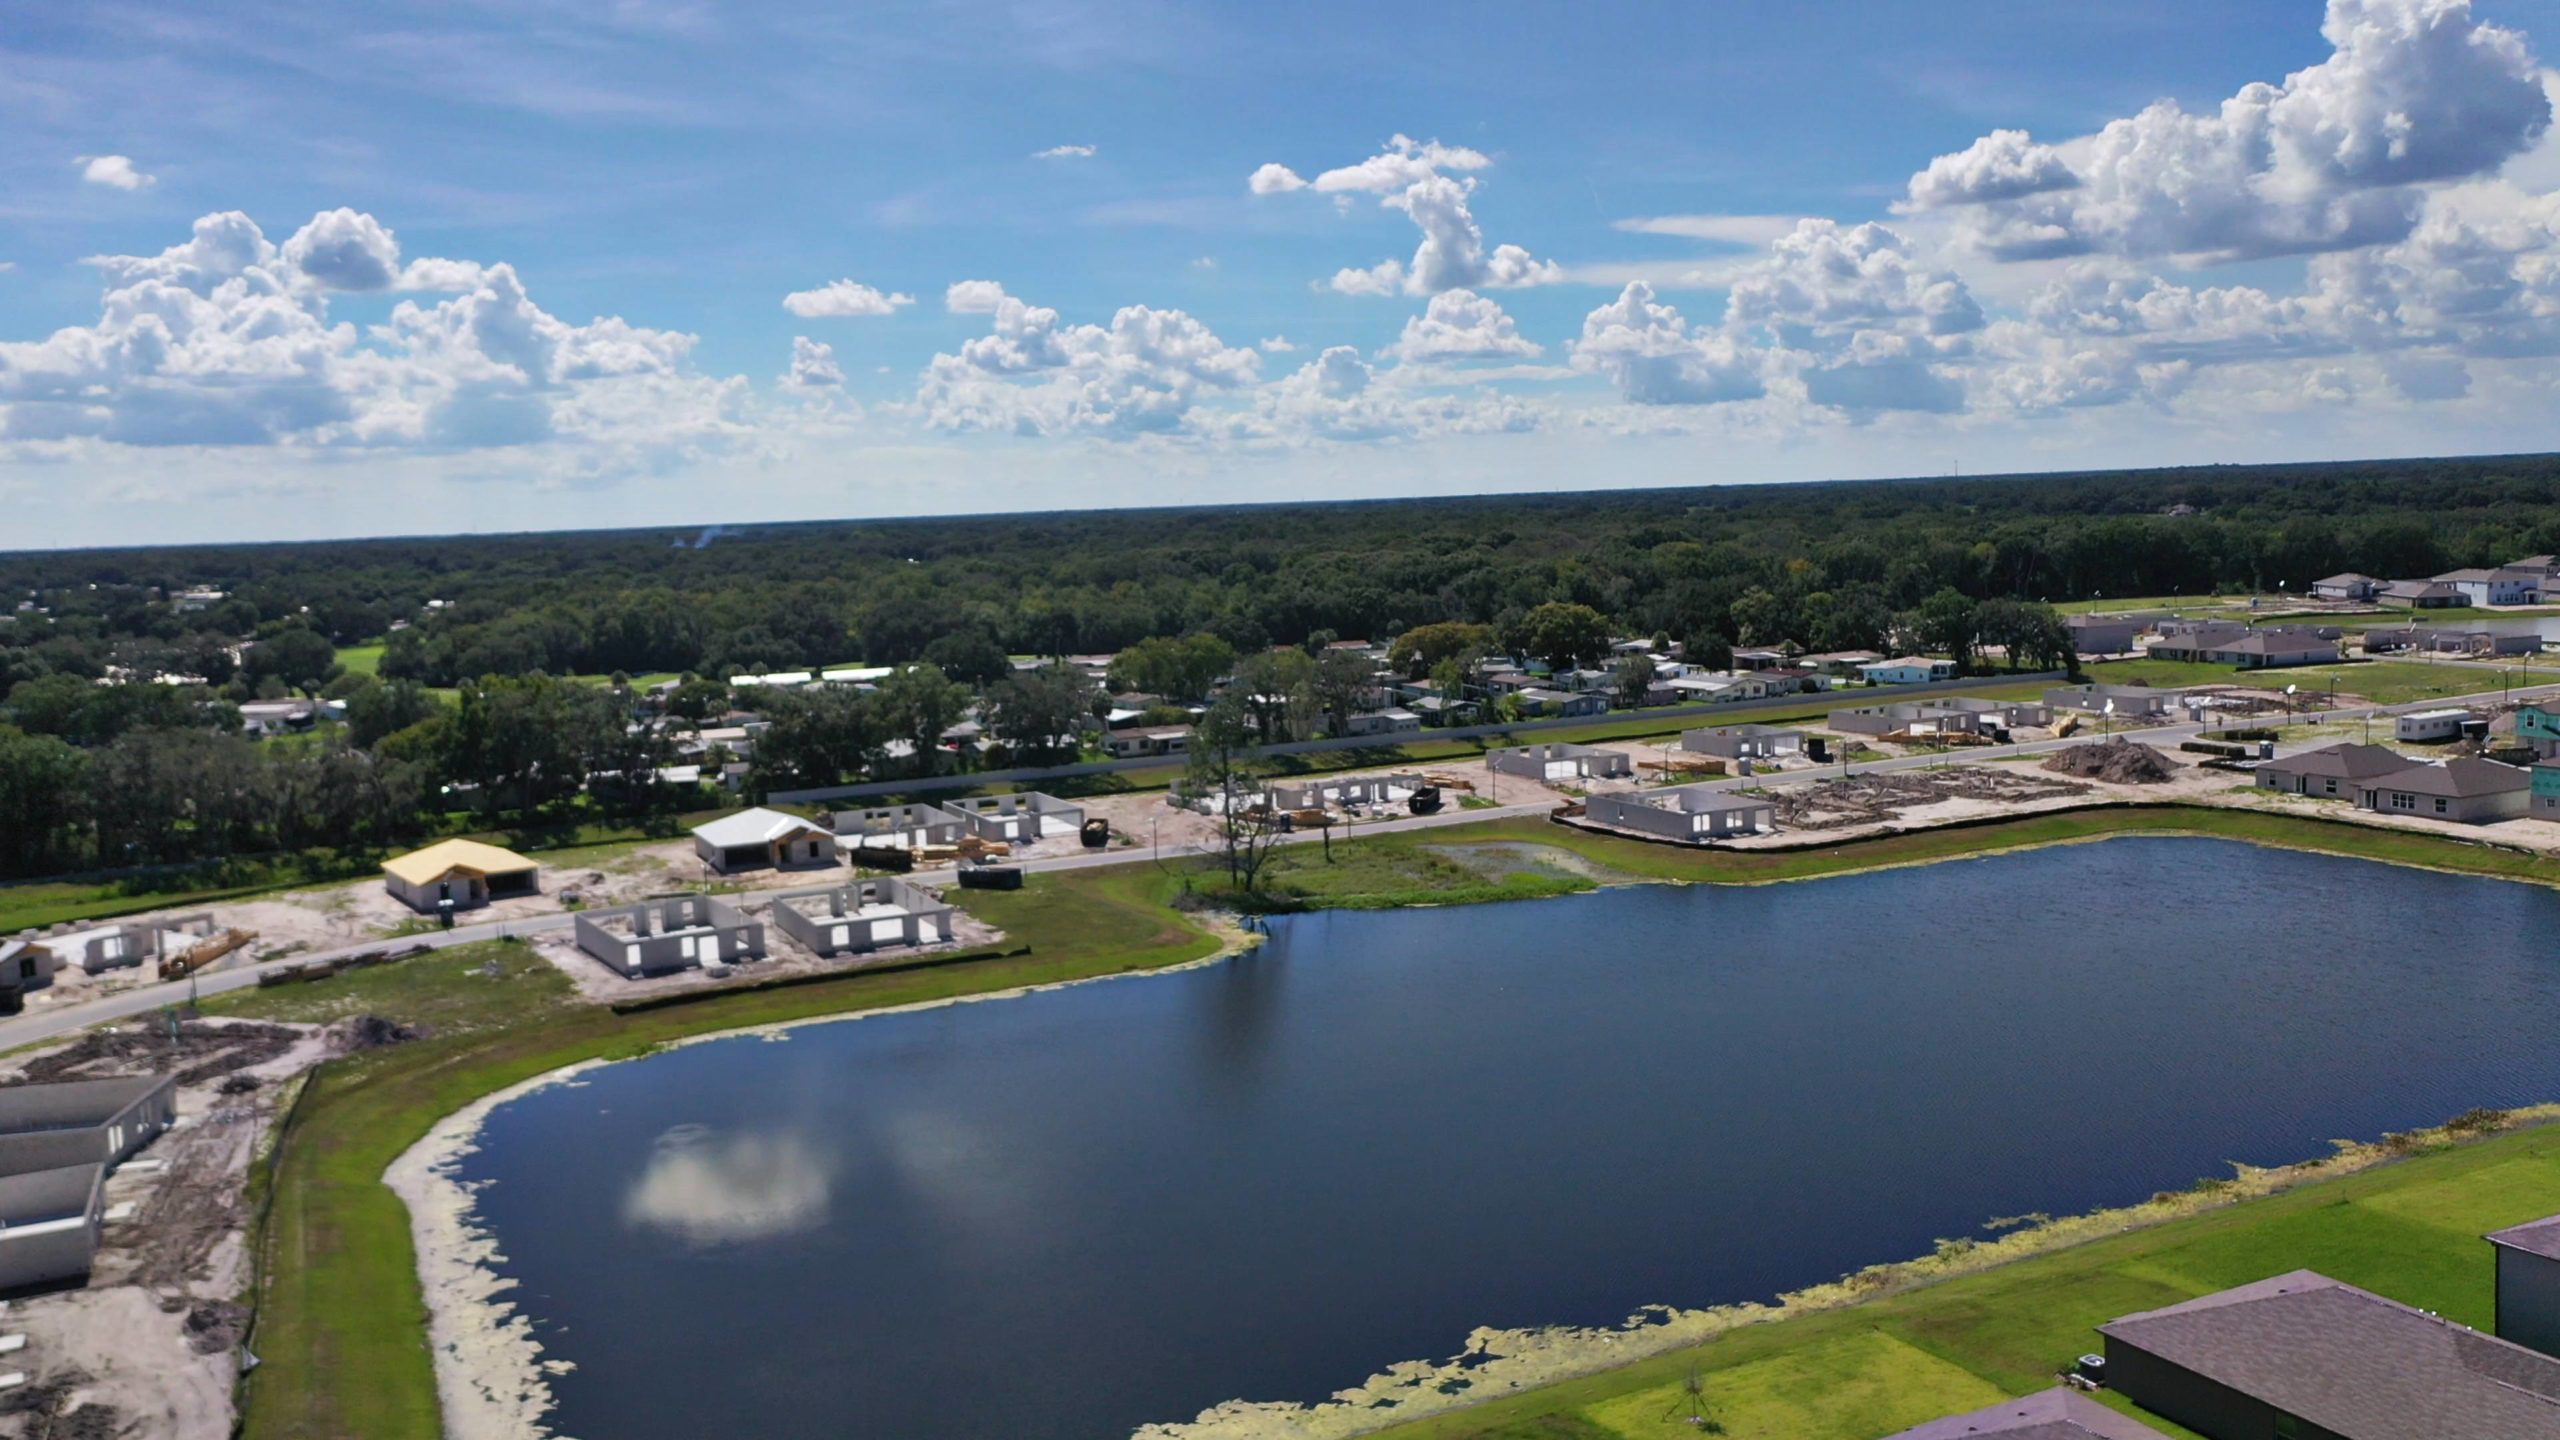 North Park Isle - Plant City Florida - Water Front Lots for Sale